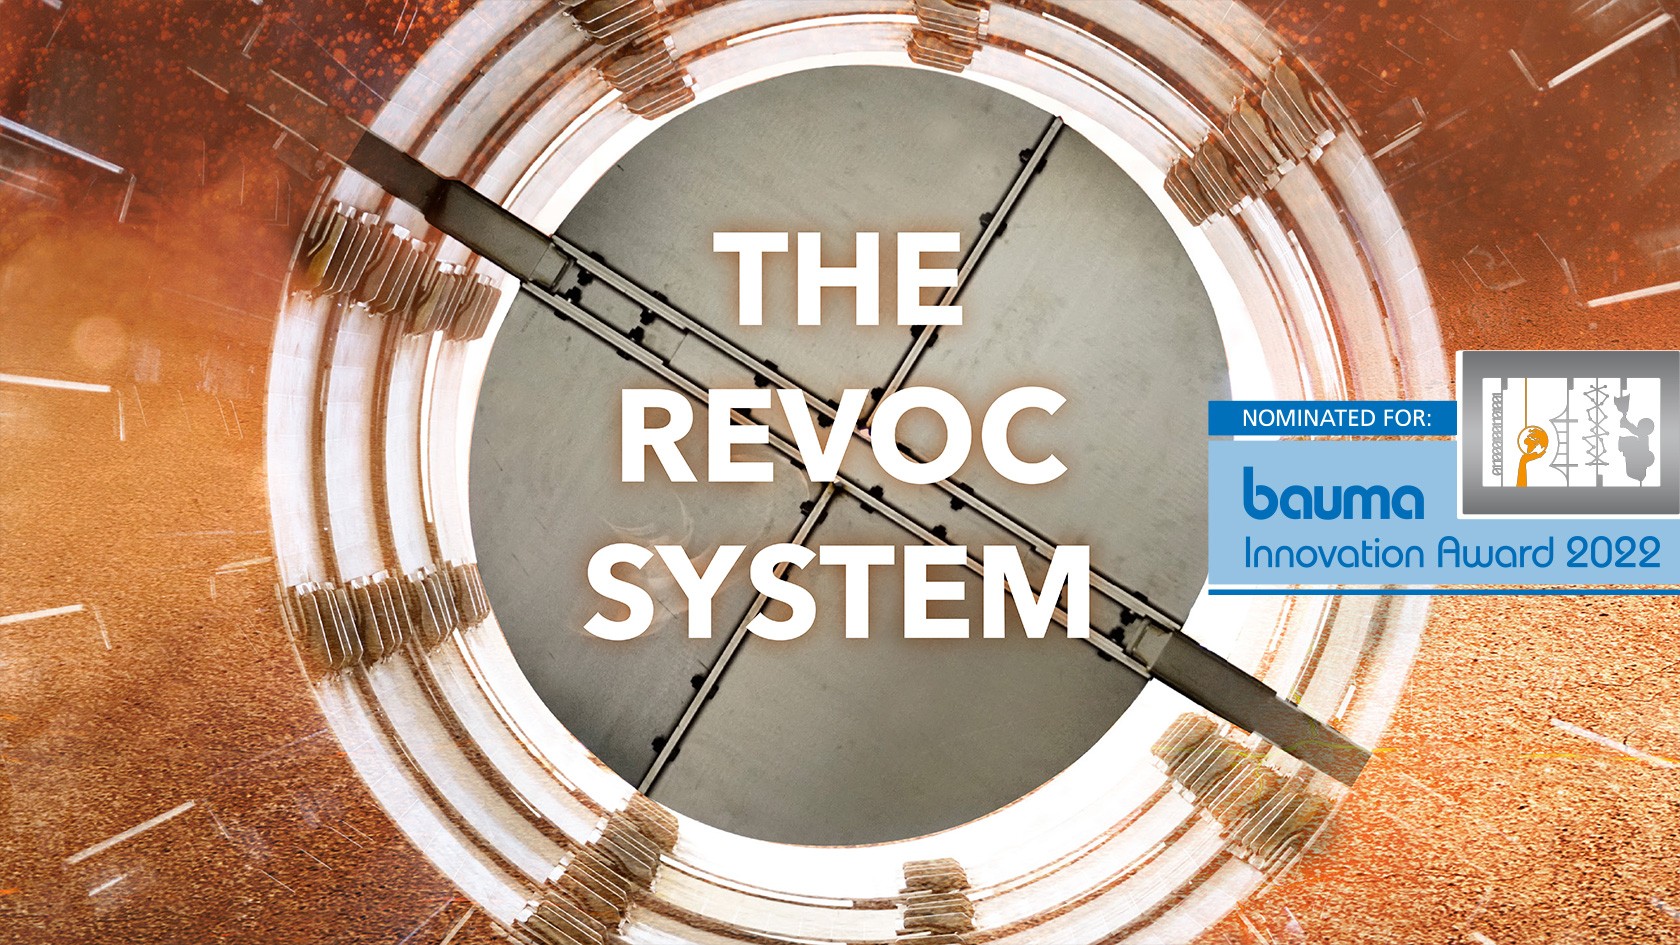 Benninghoven presents a new patented and pioneering technology: the REVOC system.